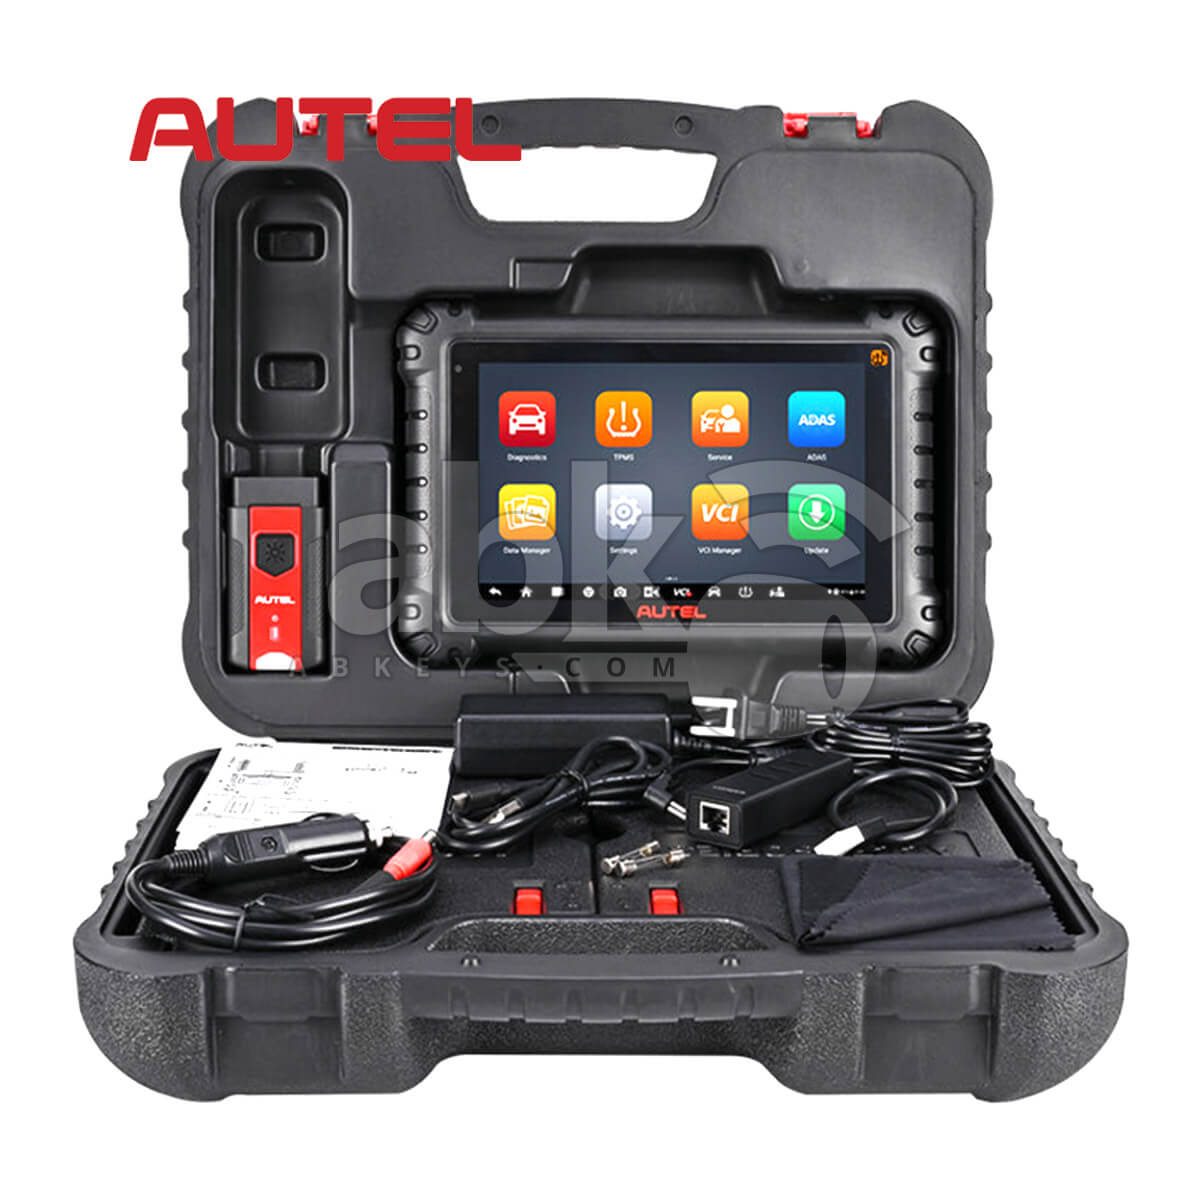 Autel MaxiSYS MS906 Pro-TS Diagnostic Scanner - Complete TPMS Function –  DiagMart